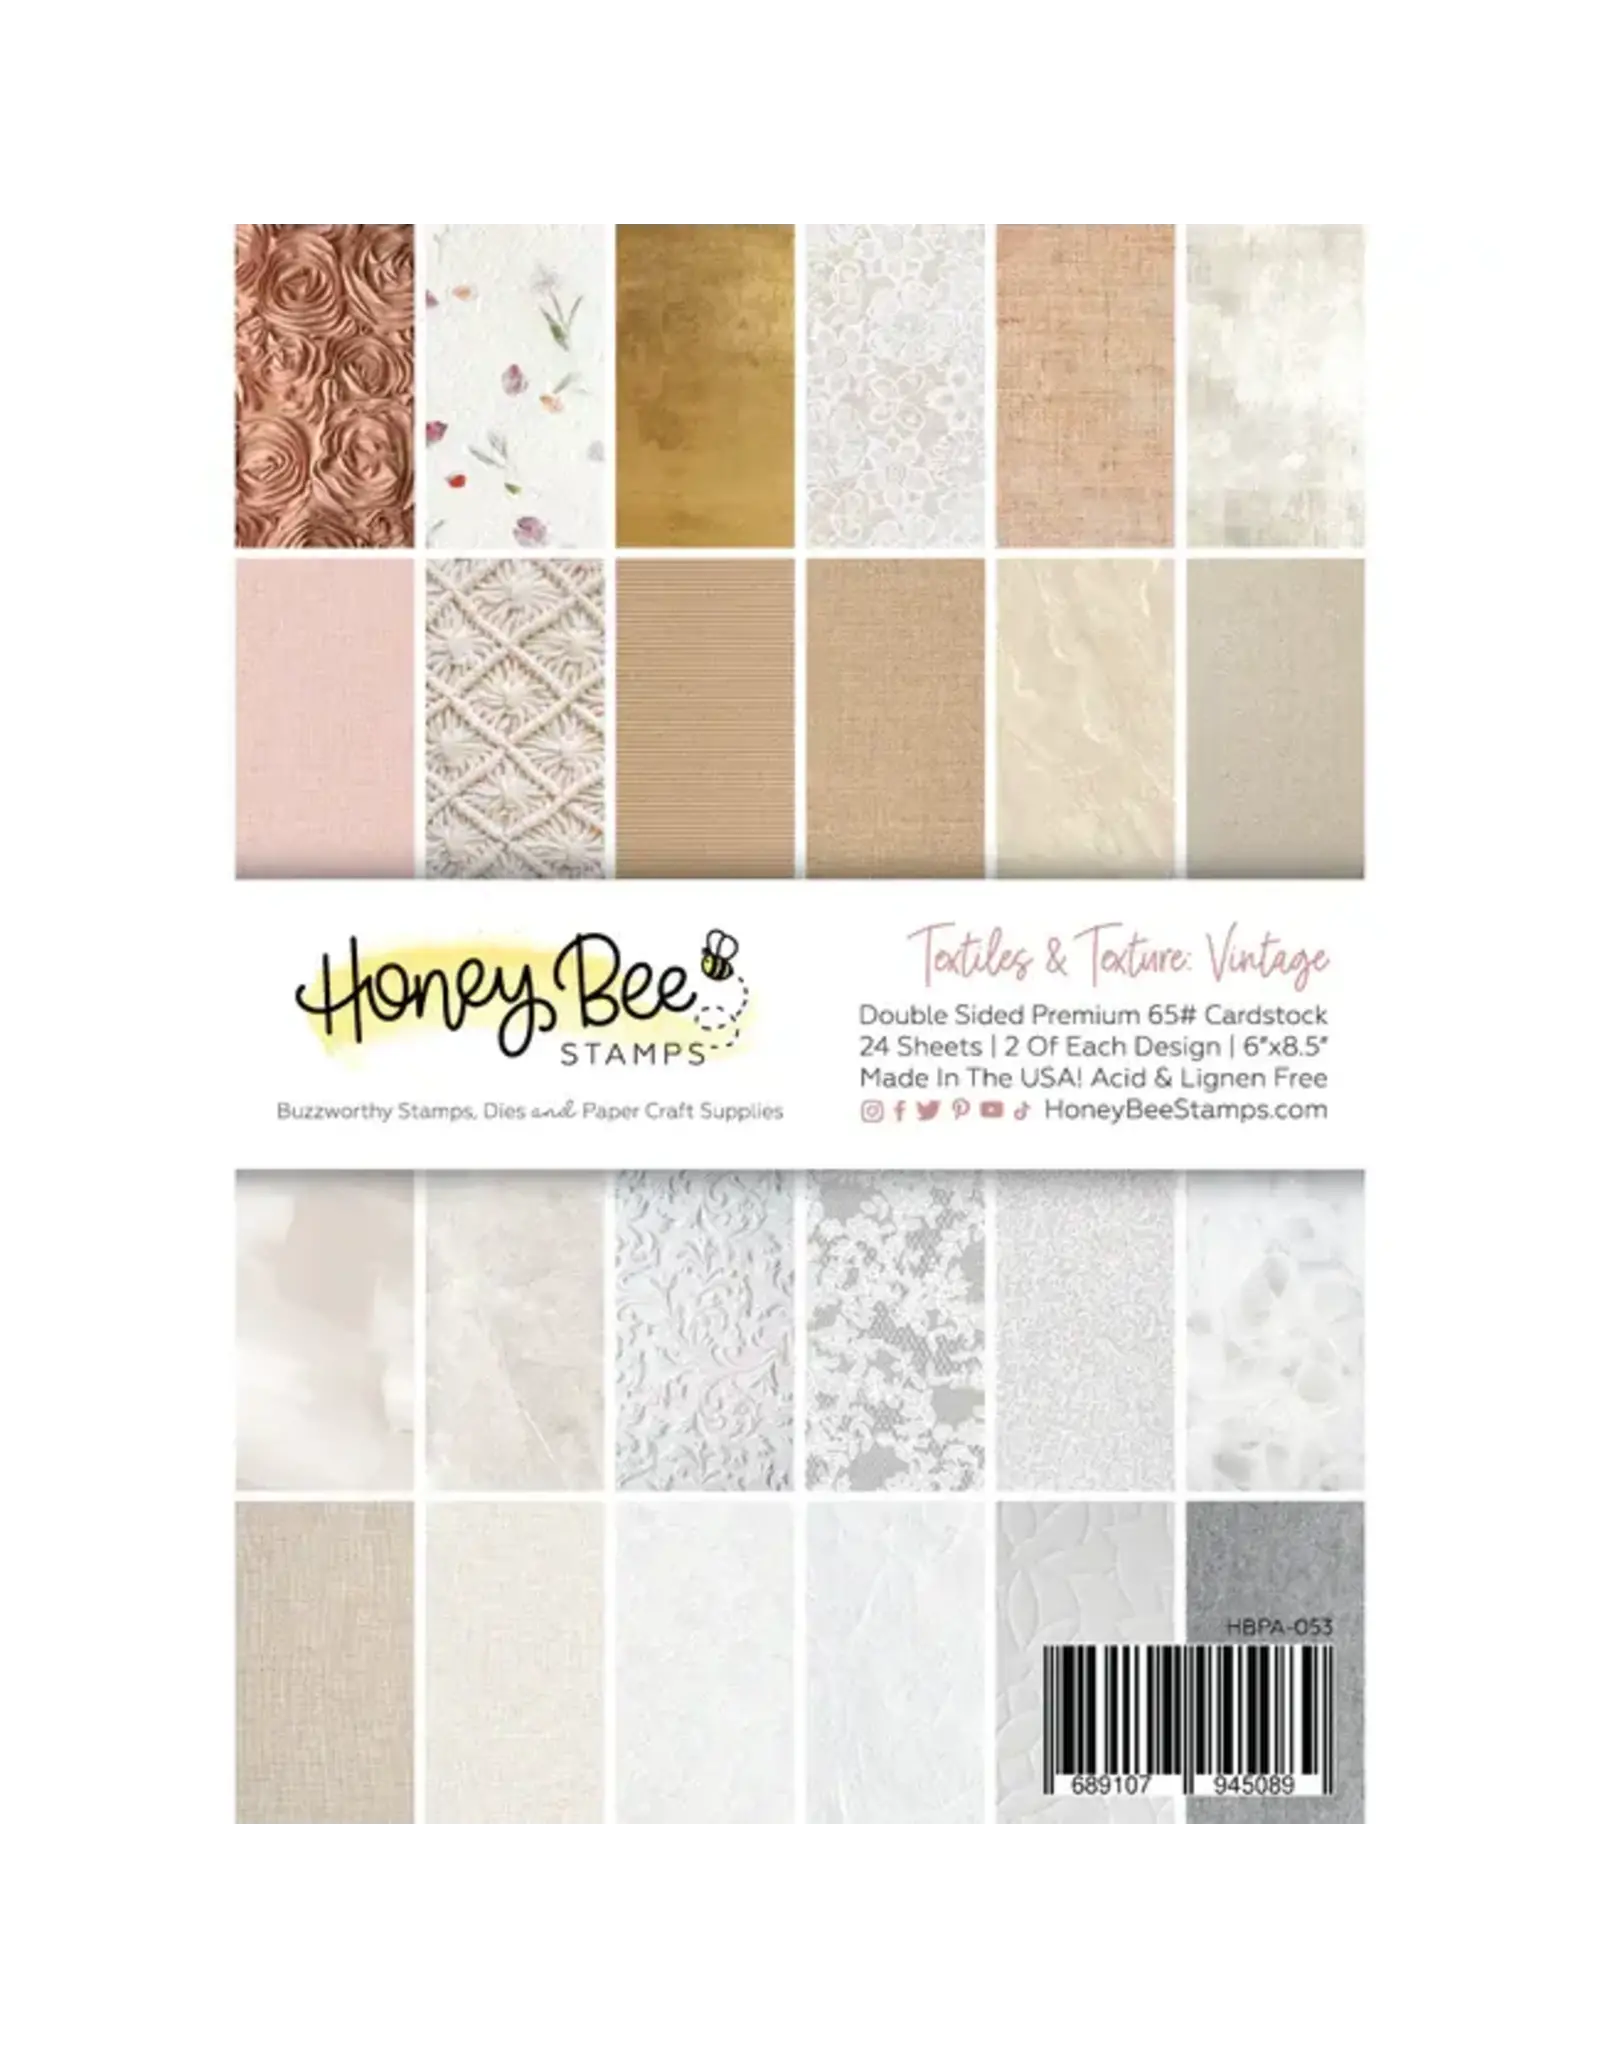 HONEY BEE HONEY BEE STAMPS TEXTILES & TEXTURE: VINTAGE PAPER PAD 6X8.5 24 SHEETS